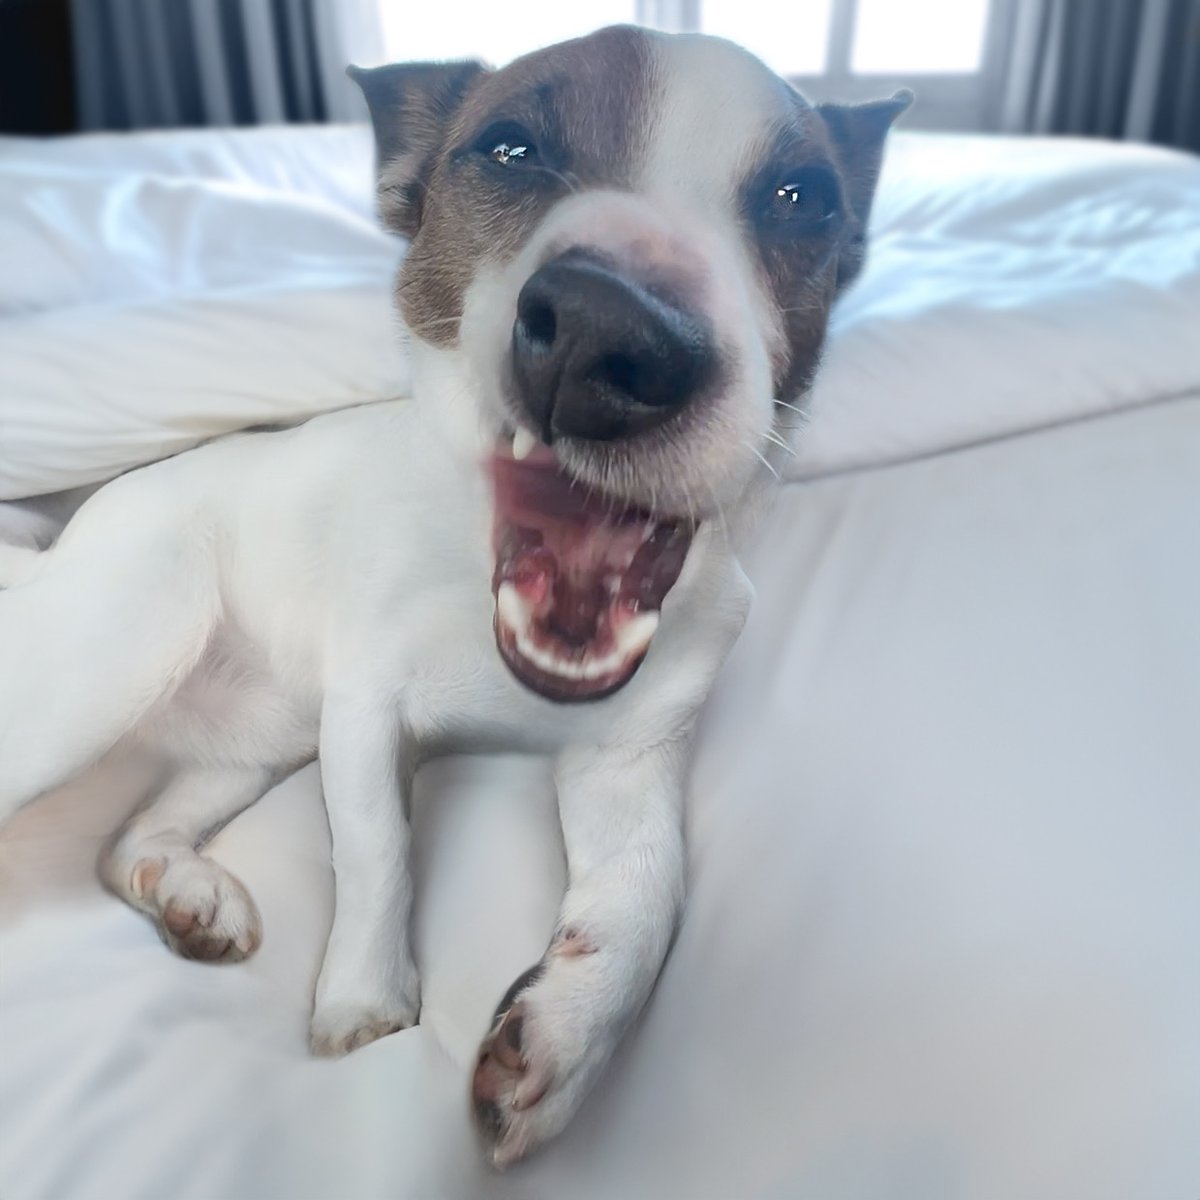 Astro’s face when I wake up way too early on a Monday 📷

#jackrussellnation #9gag #barked #animalsdoingthings #jrt #jackrusselldog #astro #dogs #dogsofinstagram #dog #dogstagram #jackrussellofinstagram #cute #cuteness #cutenessoverload #doggo #doglovers #doglove #dogsofnyc